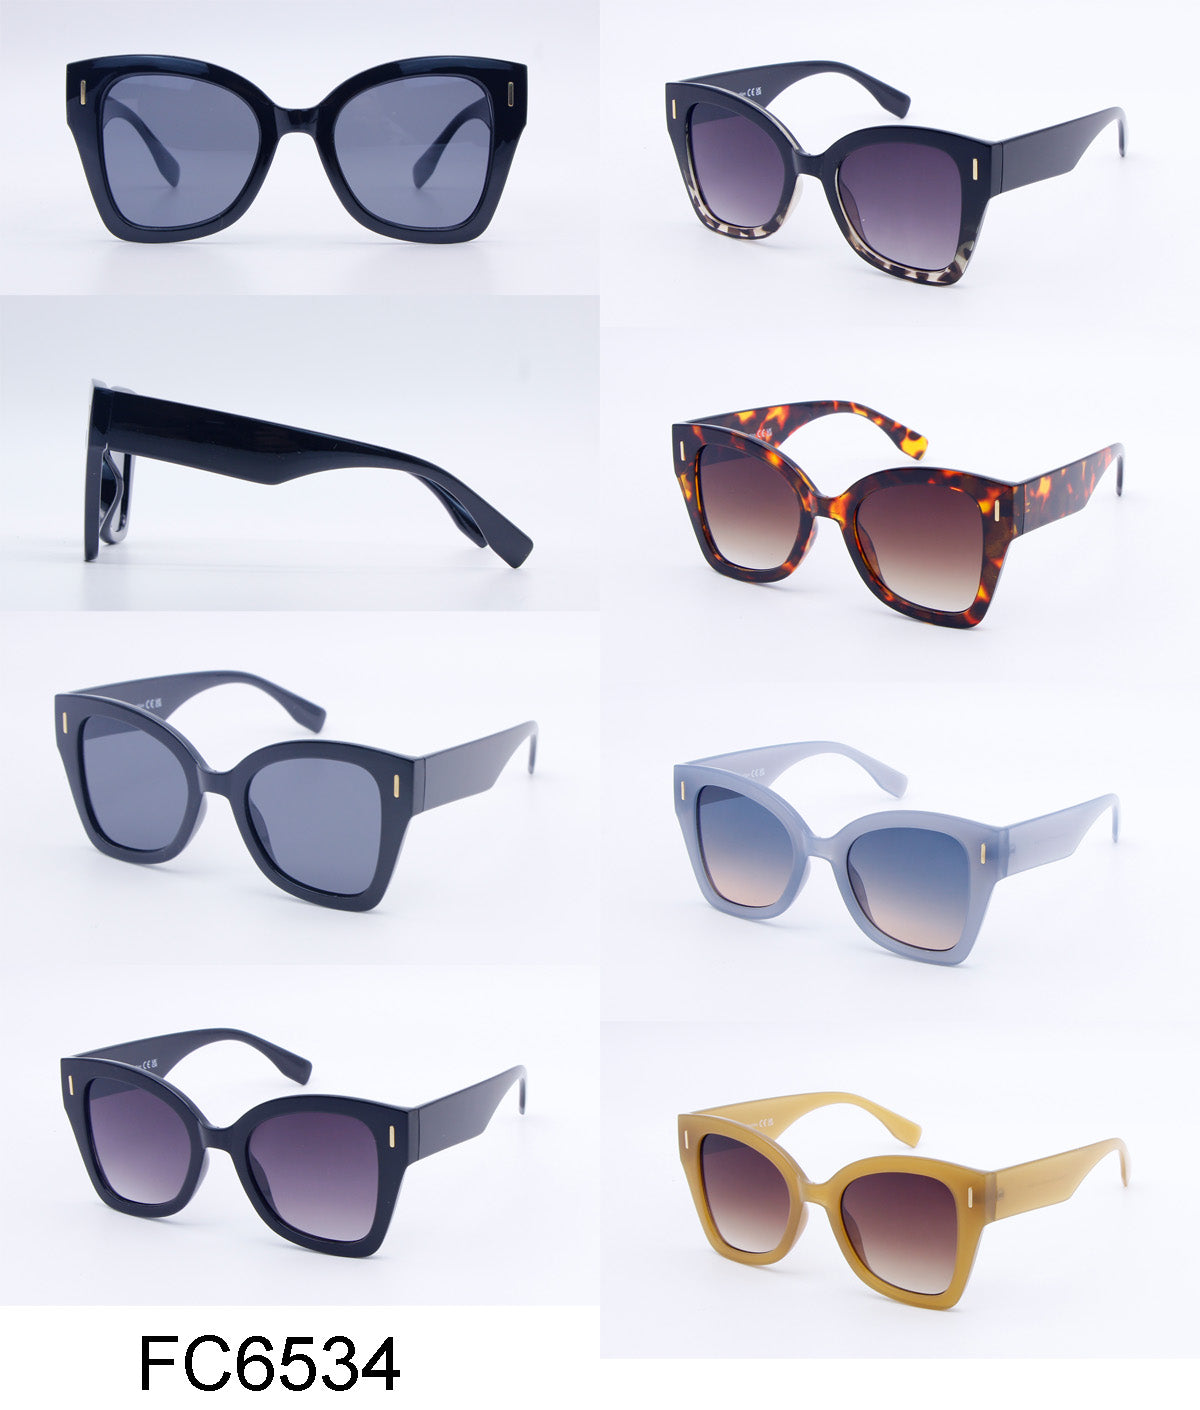 FC 6534 - Plastic Butterfly Sunglasses with Flat Lens